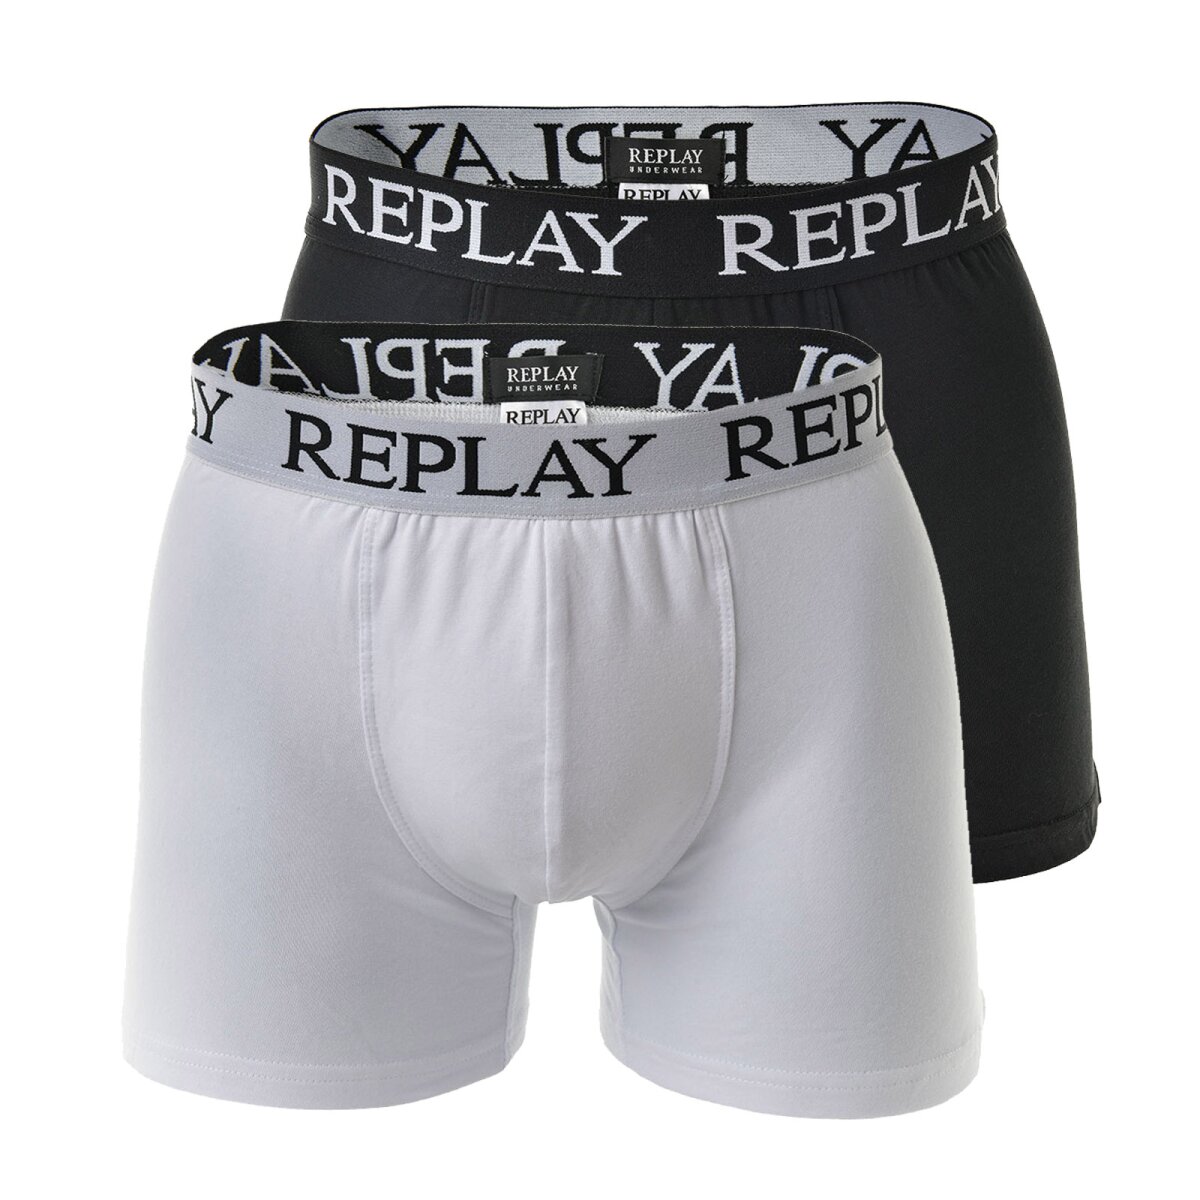 REPLAY Men's Boxer Shorts, Pack of 2 - Trunks, Cotton Stretch, 21,45 €